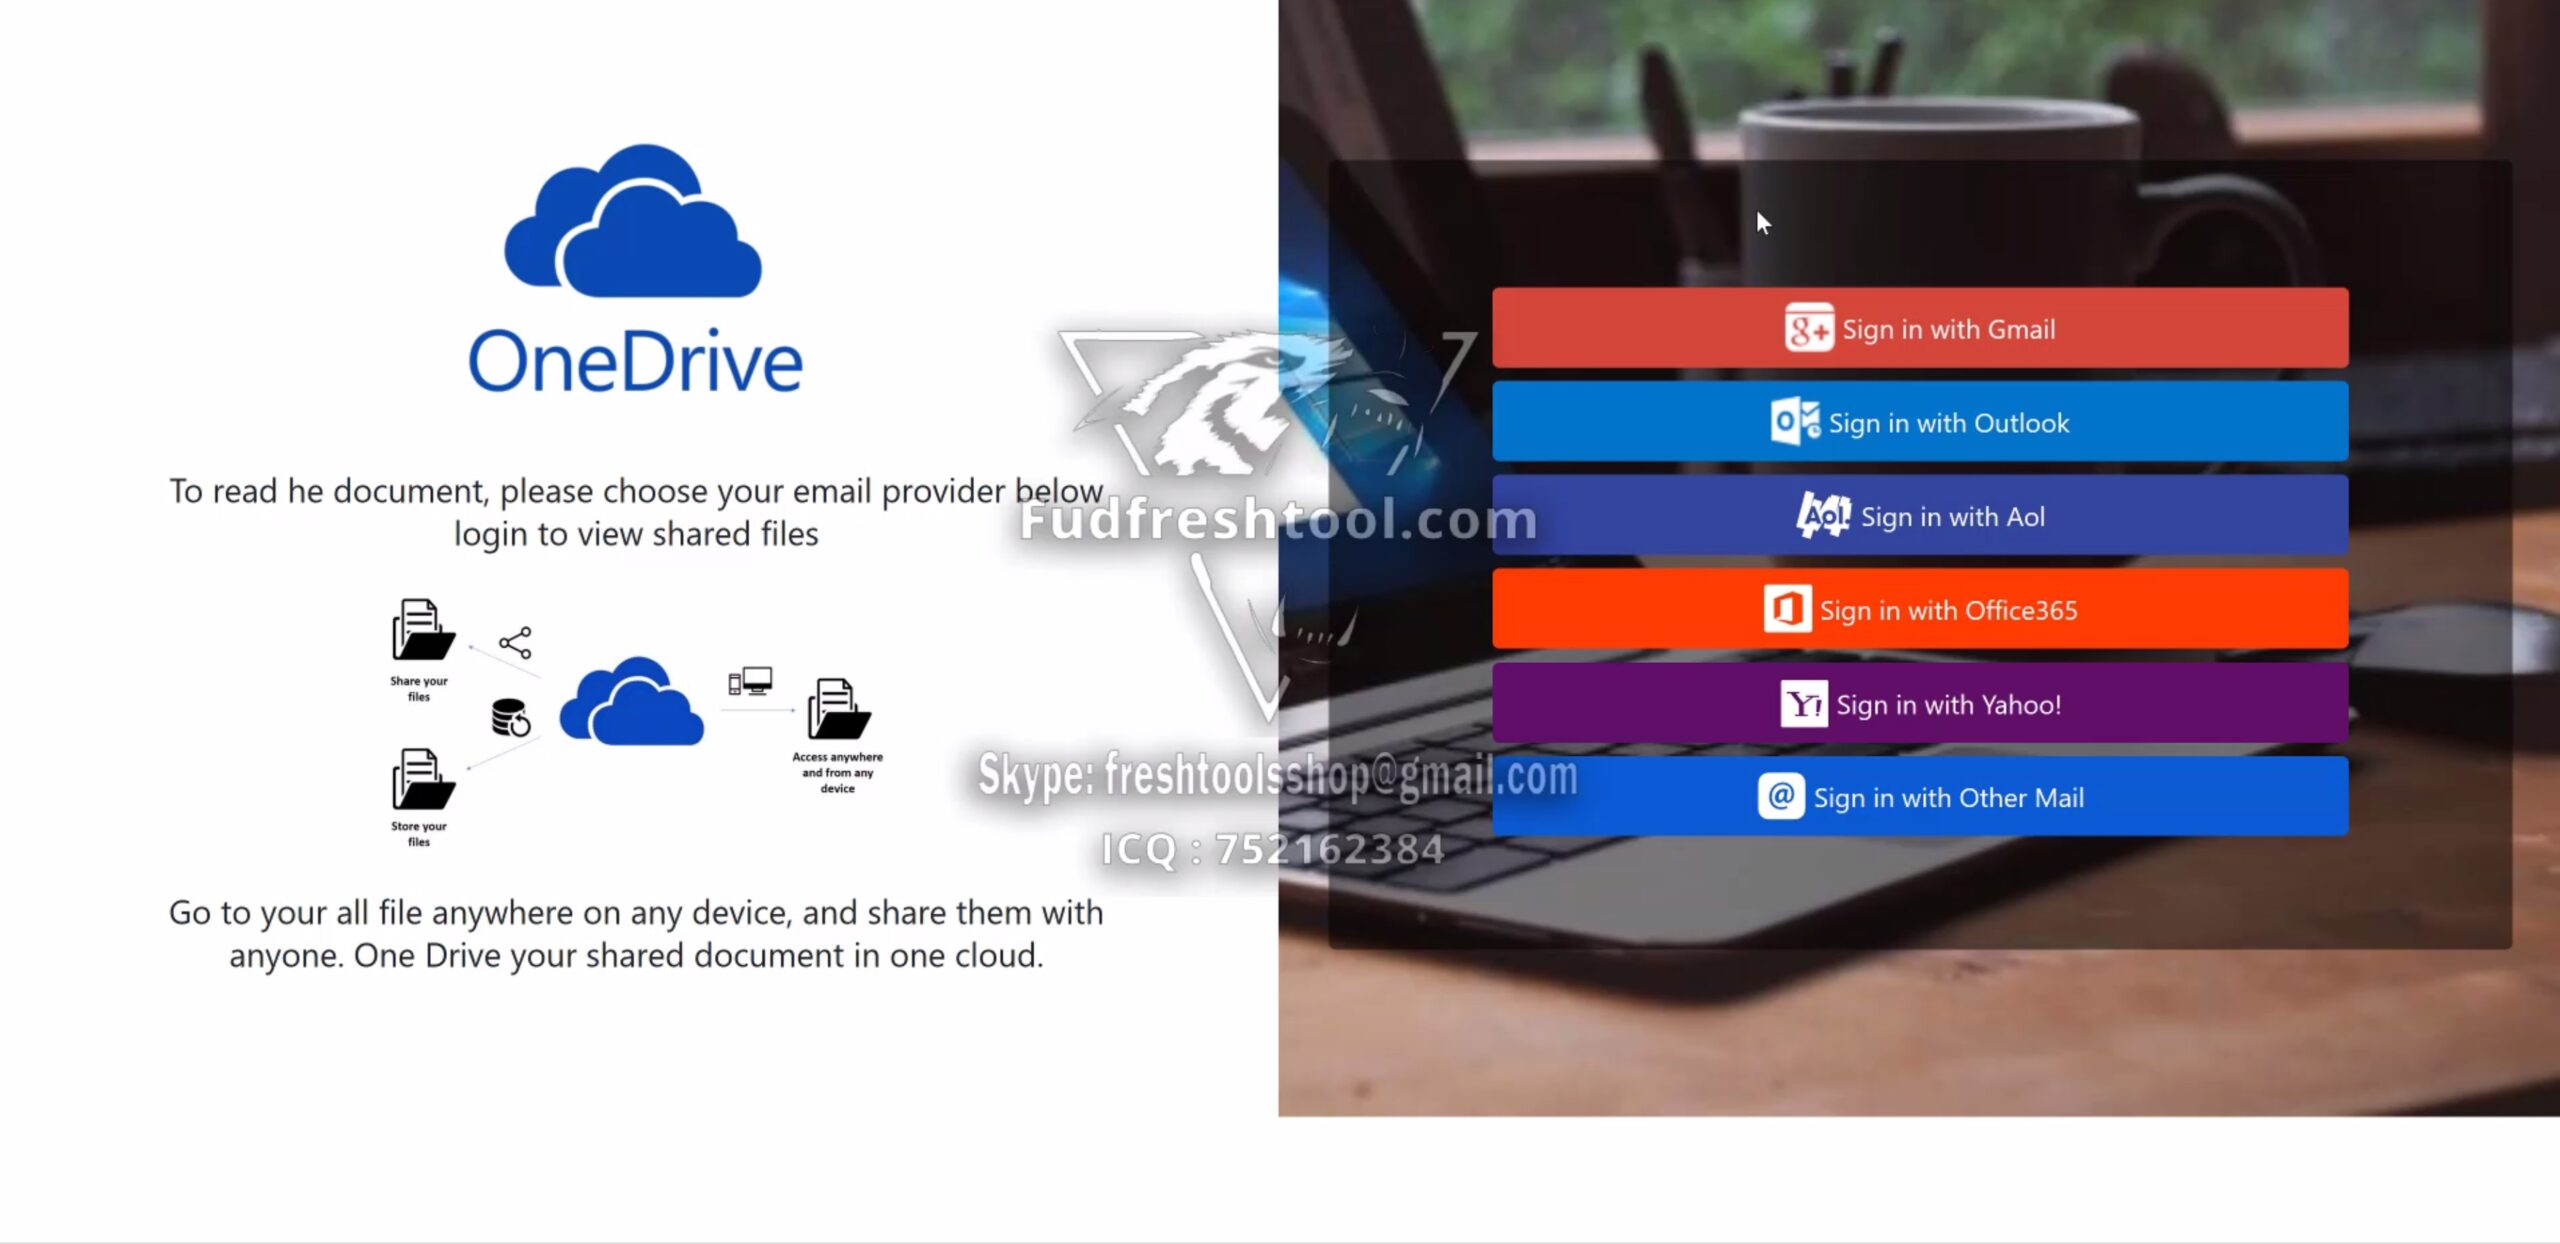 New OneDrive Scam Page